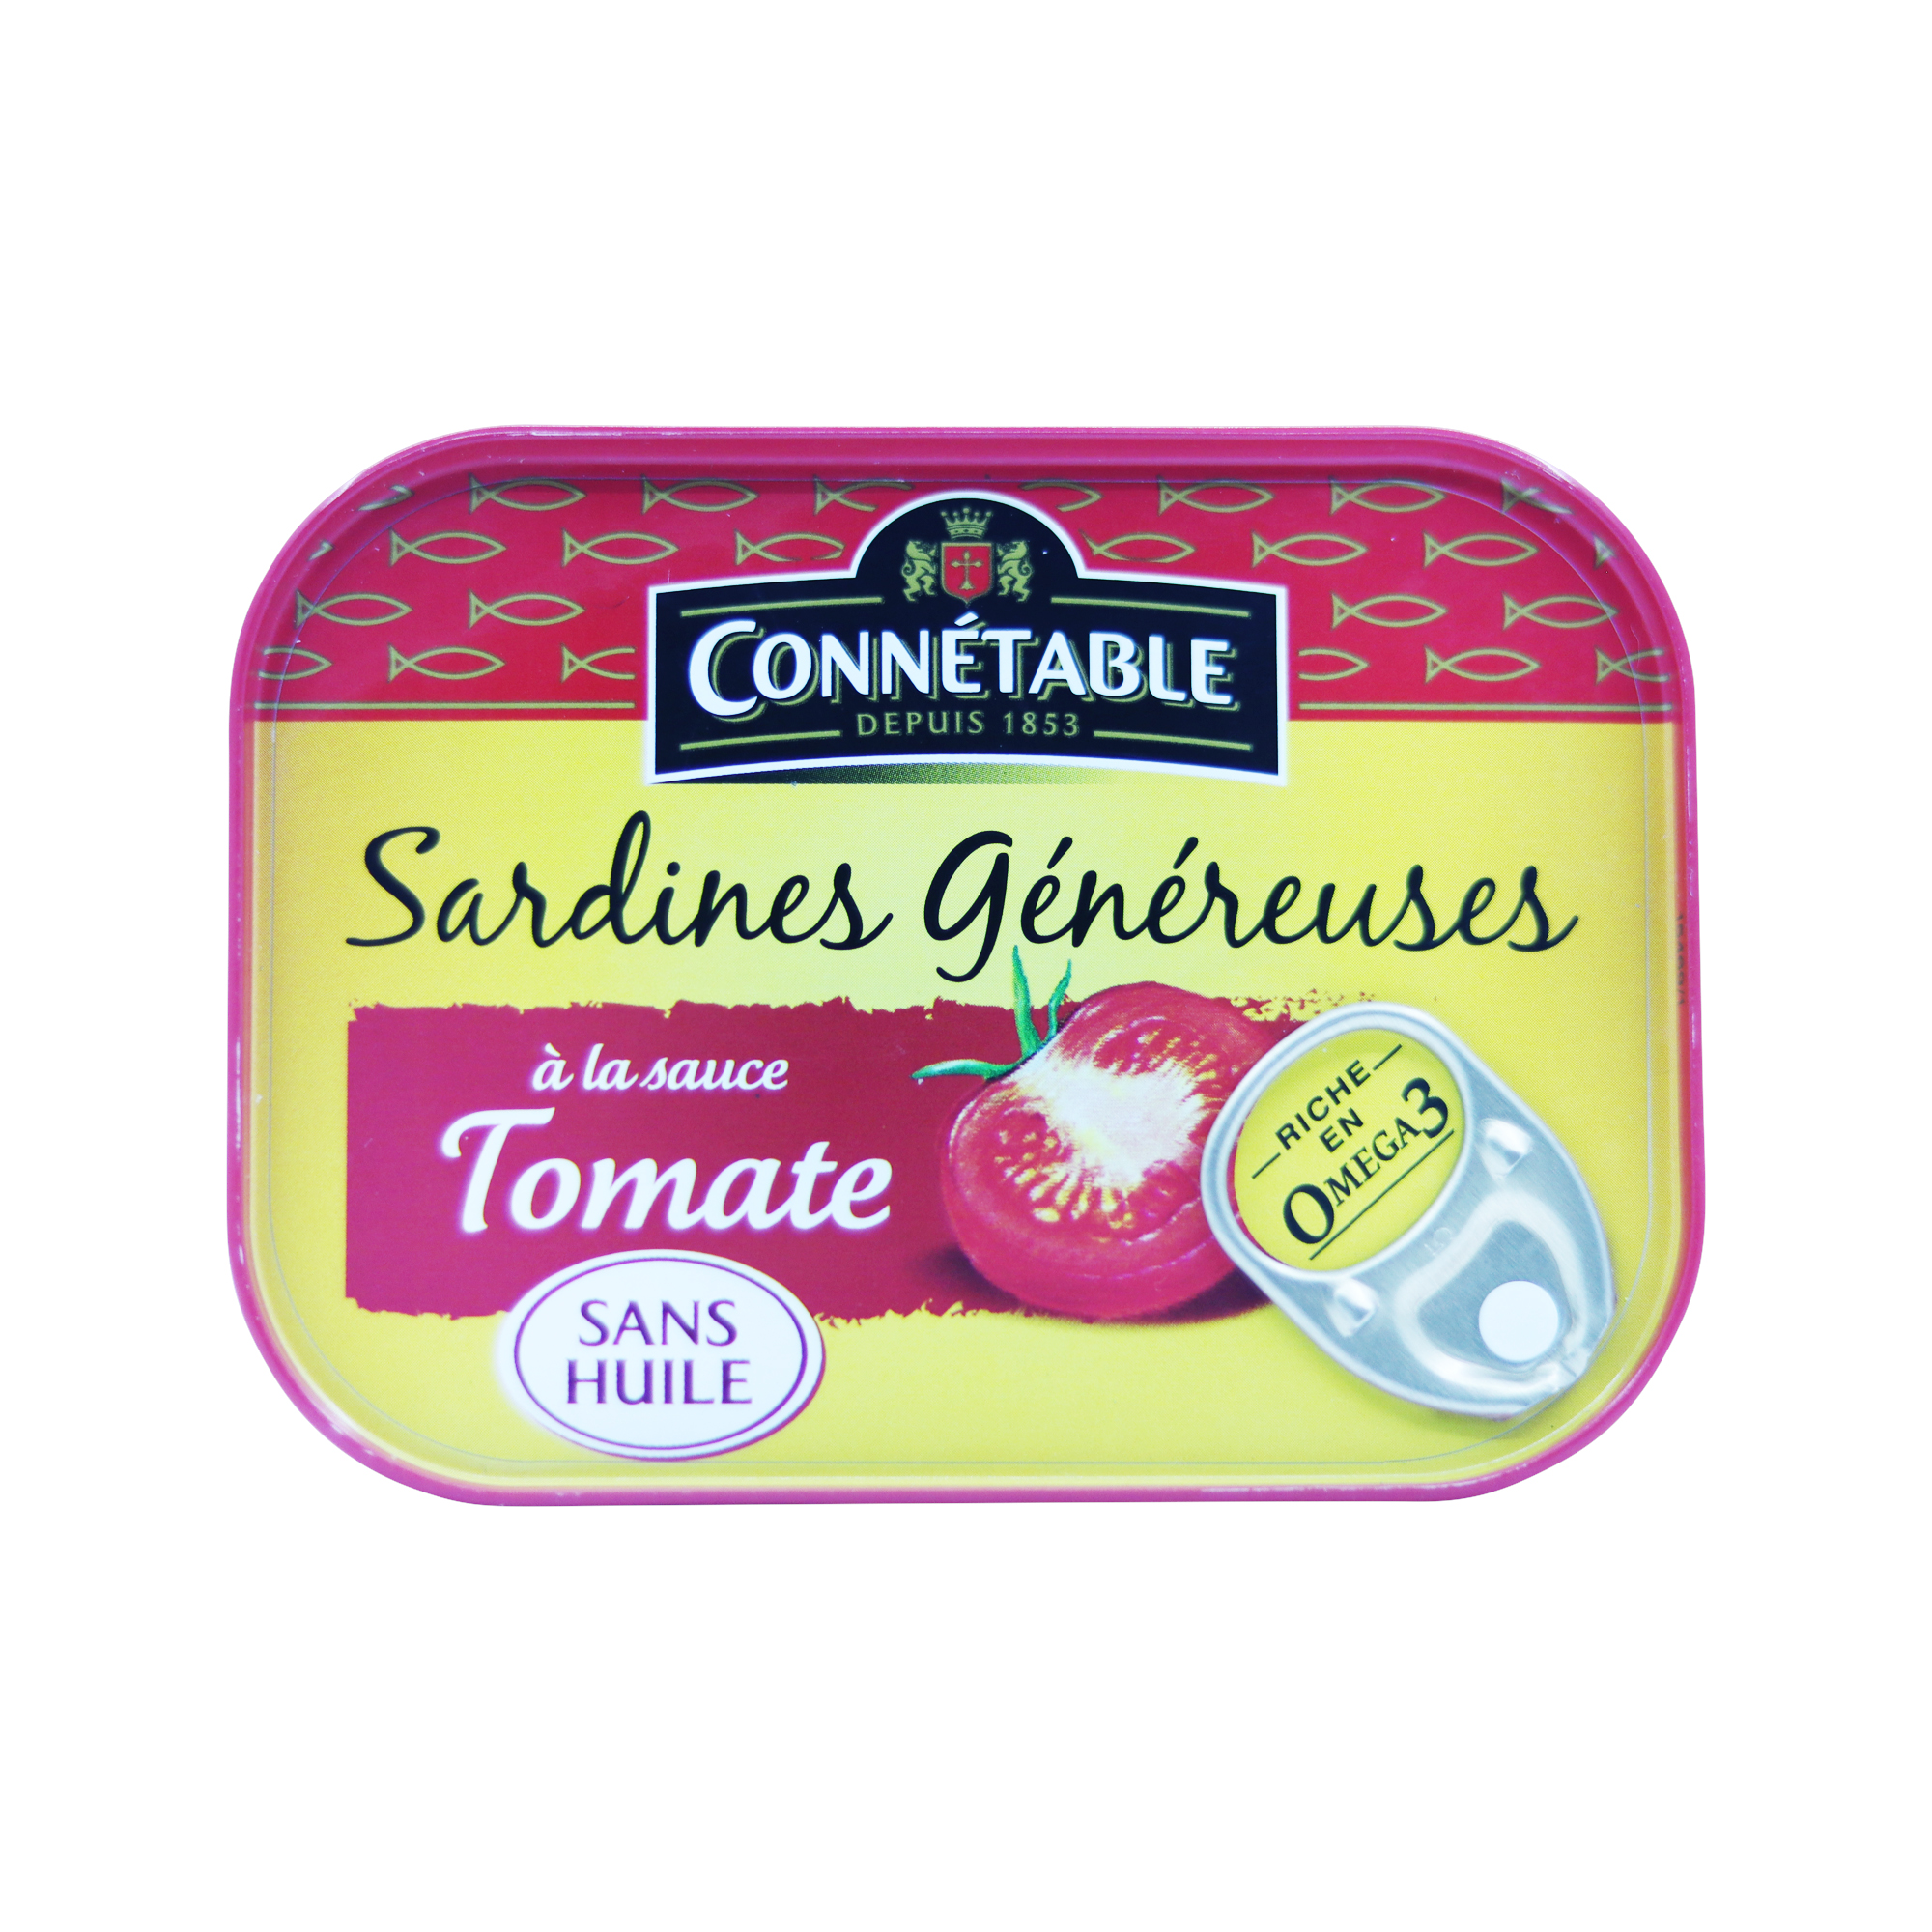 Connetable Sardines without oil, in tomato sauce 140g